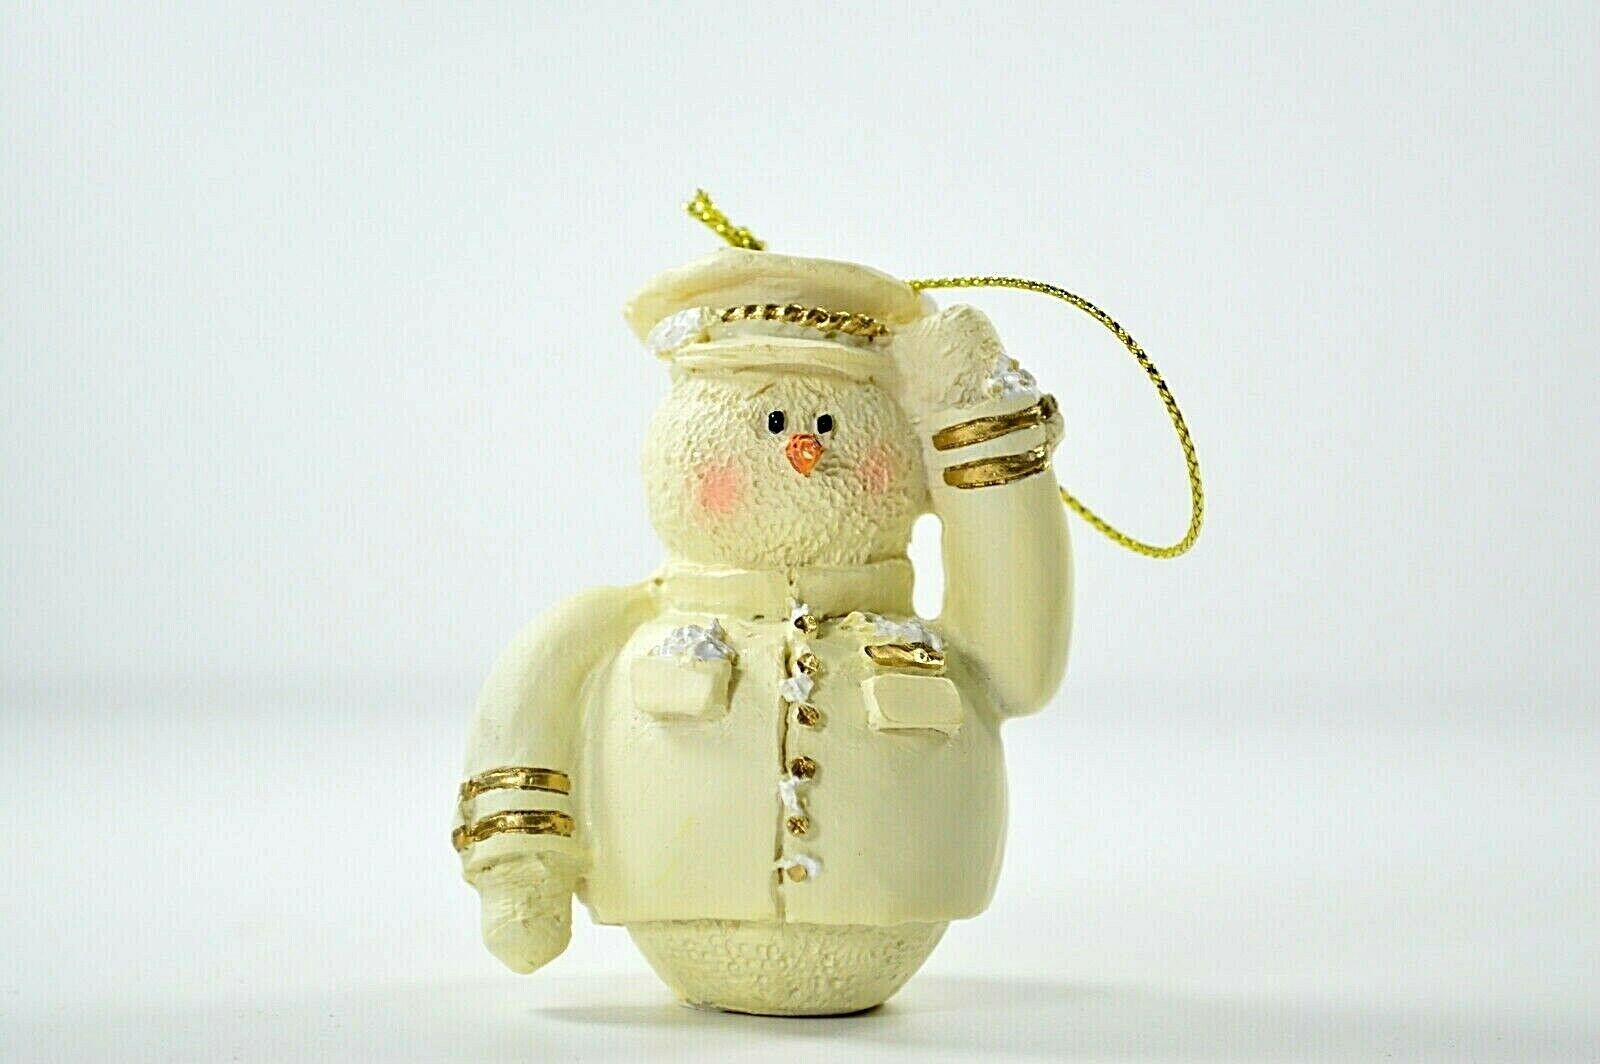 ORNAMENT MILITARY US ARMED FORCES SERVICE NAVY CHRISTMAS HOLIDAY SNOWMAN 15079